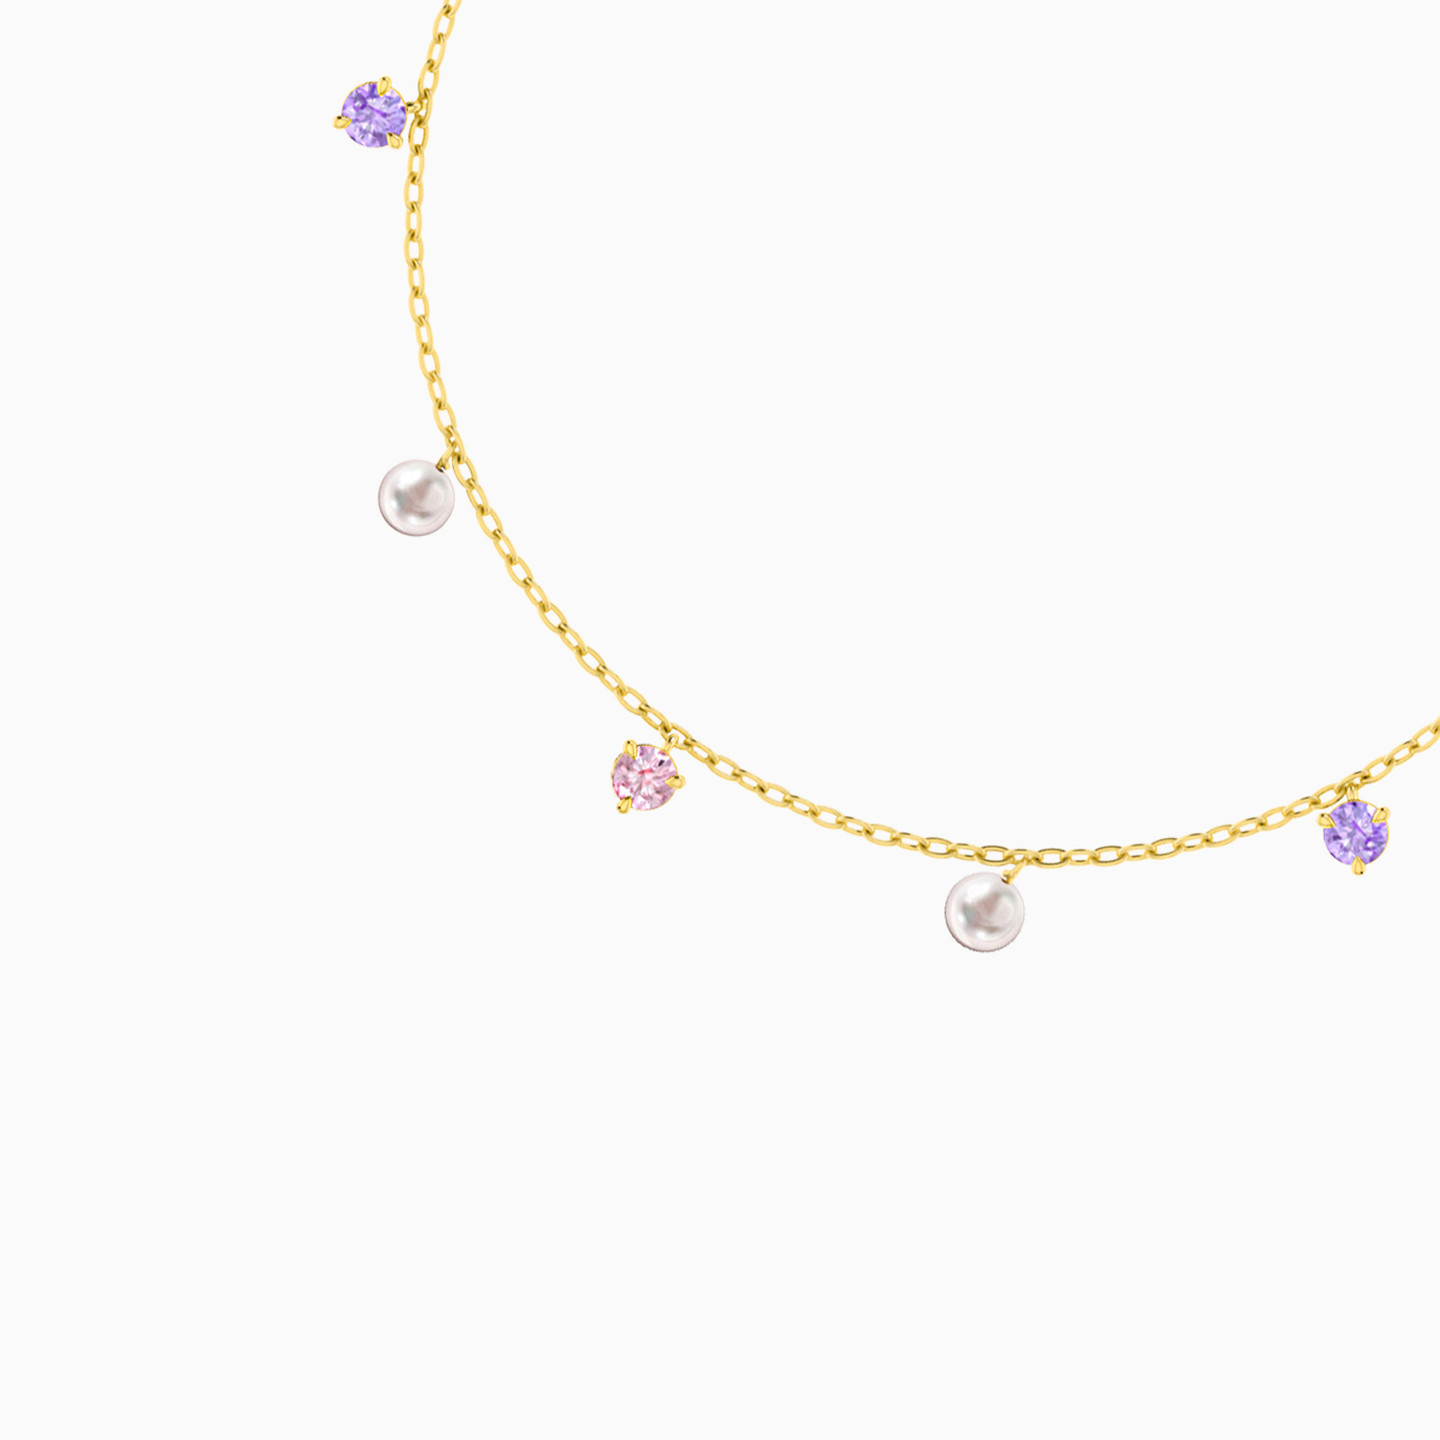 18K Gold Colored Stones Chain Anklet - 3